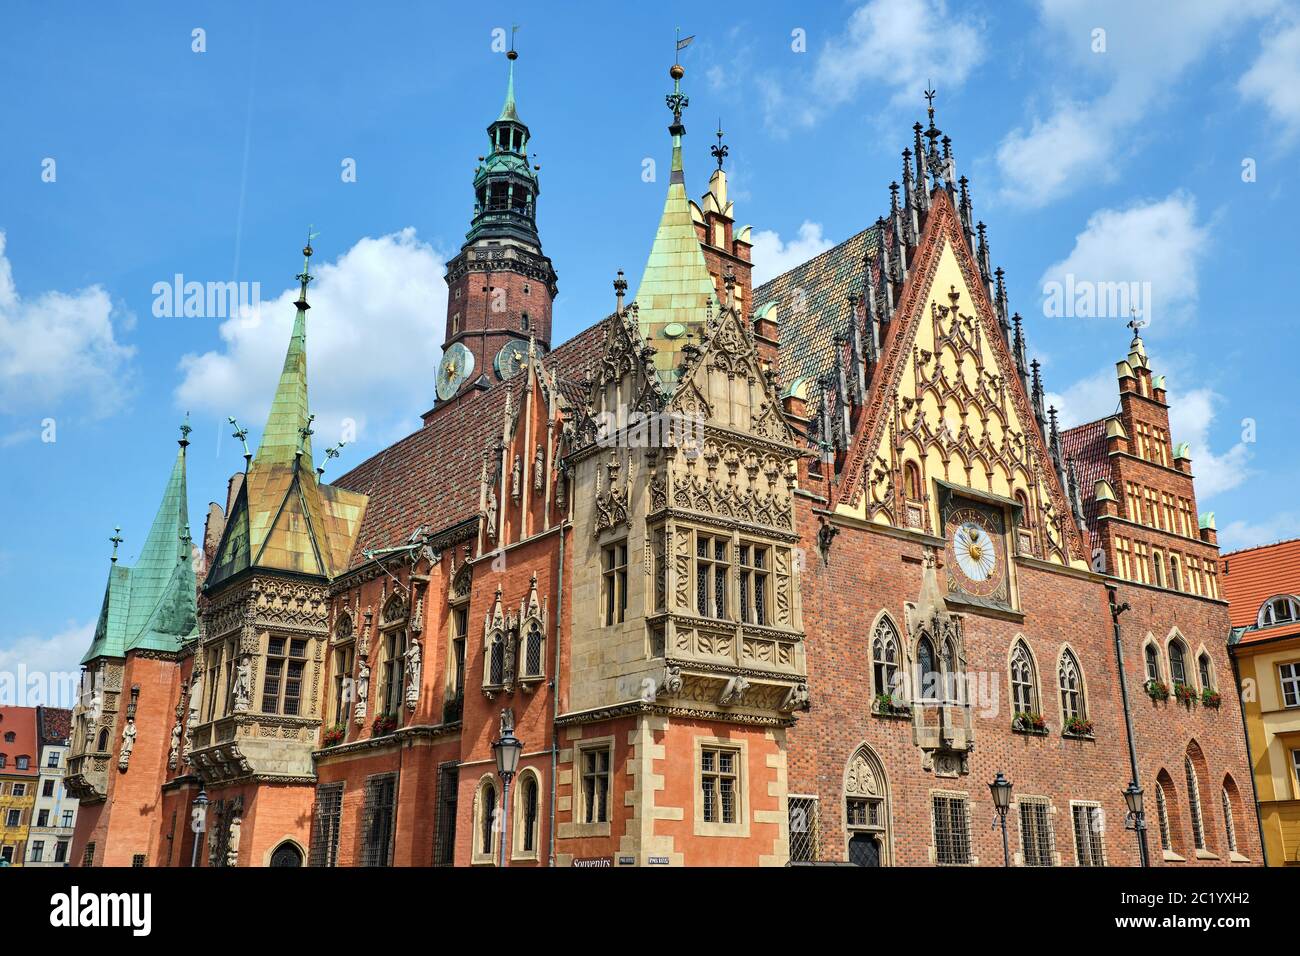 The beautiful Old Town Hall Of Wroclaw in Silesia, Poland Stock Photo